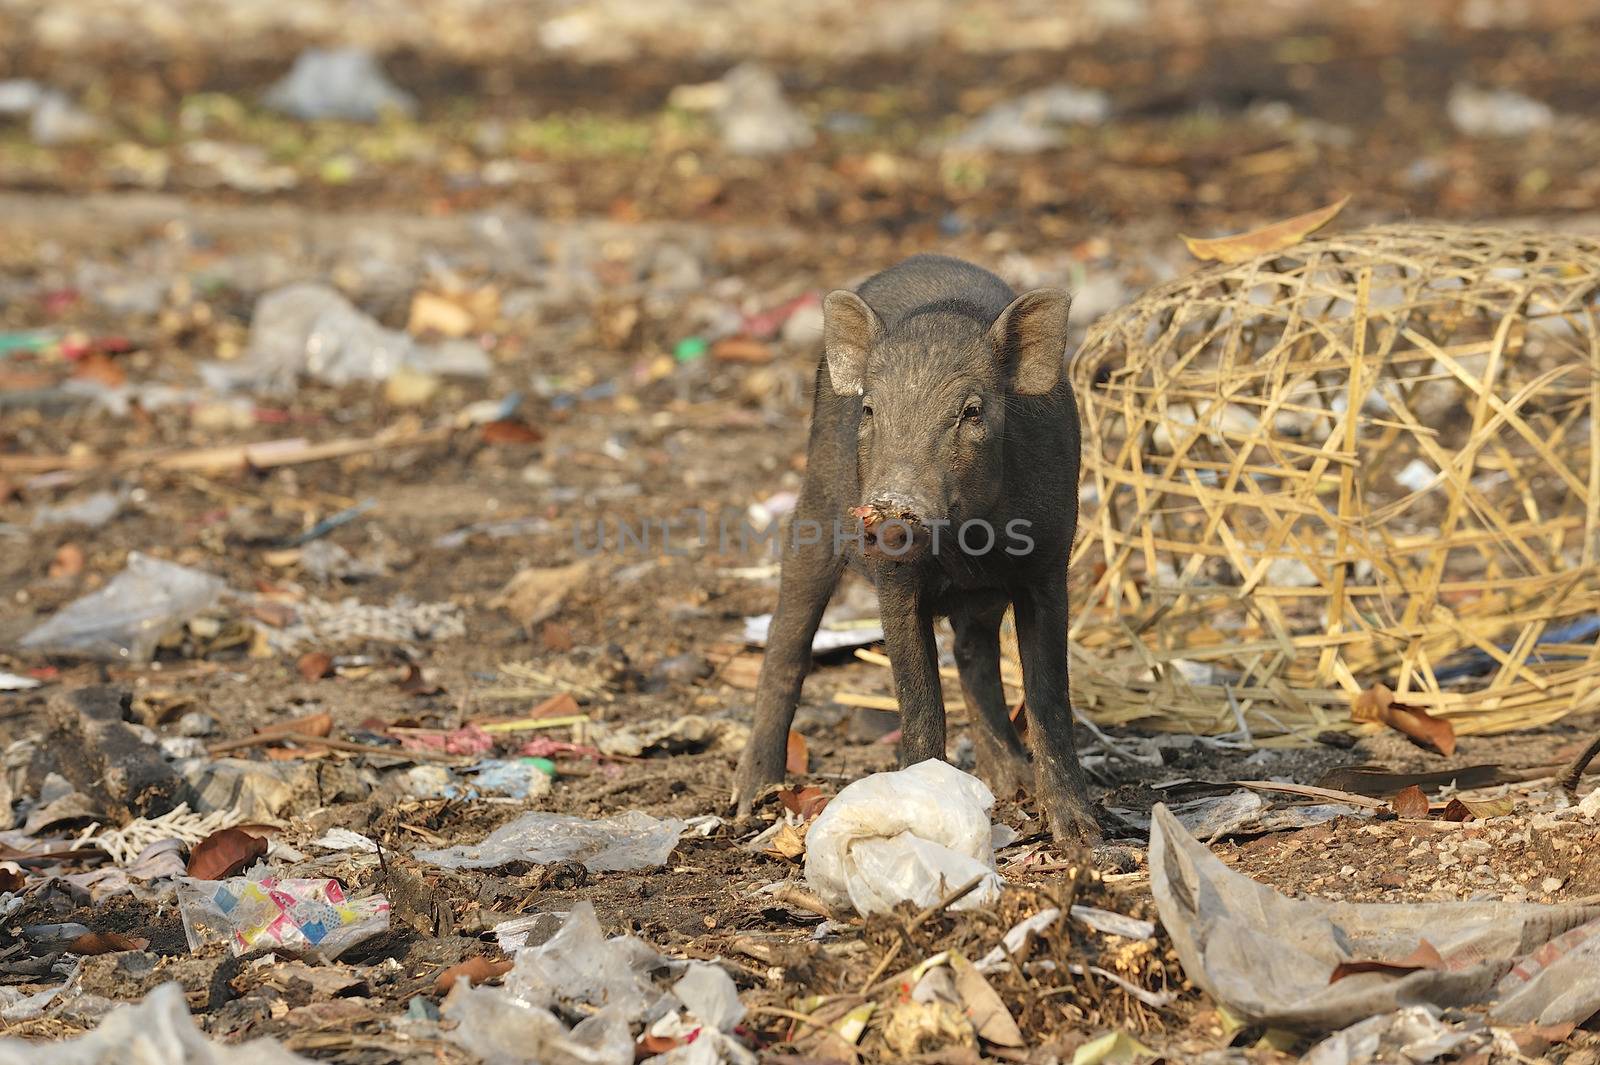 Wild pig in abandon village by think4photop